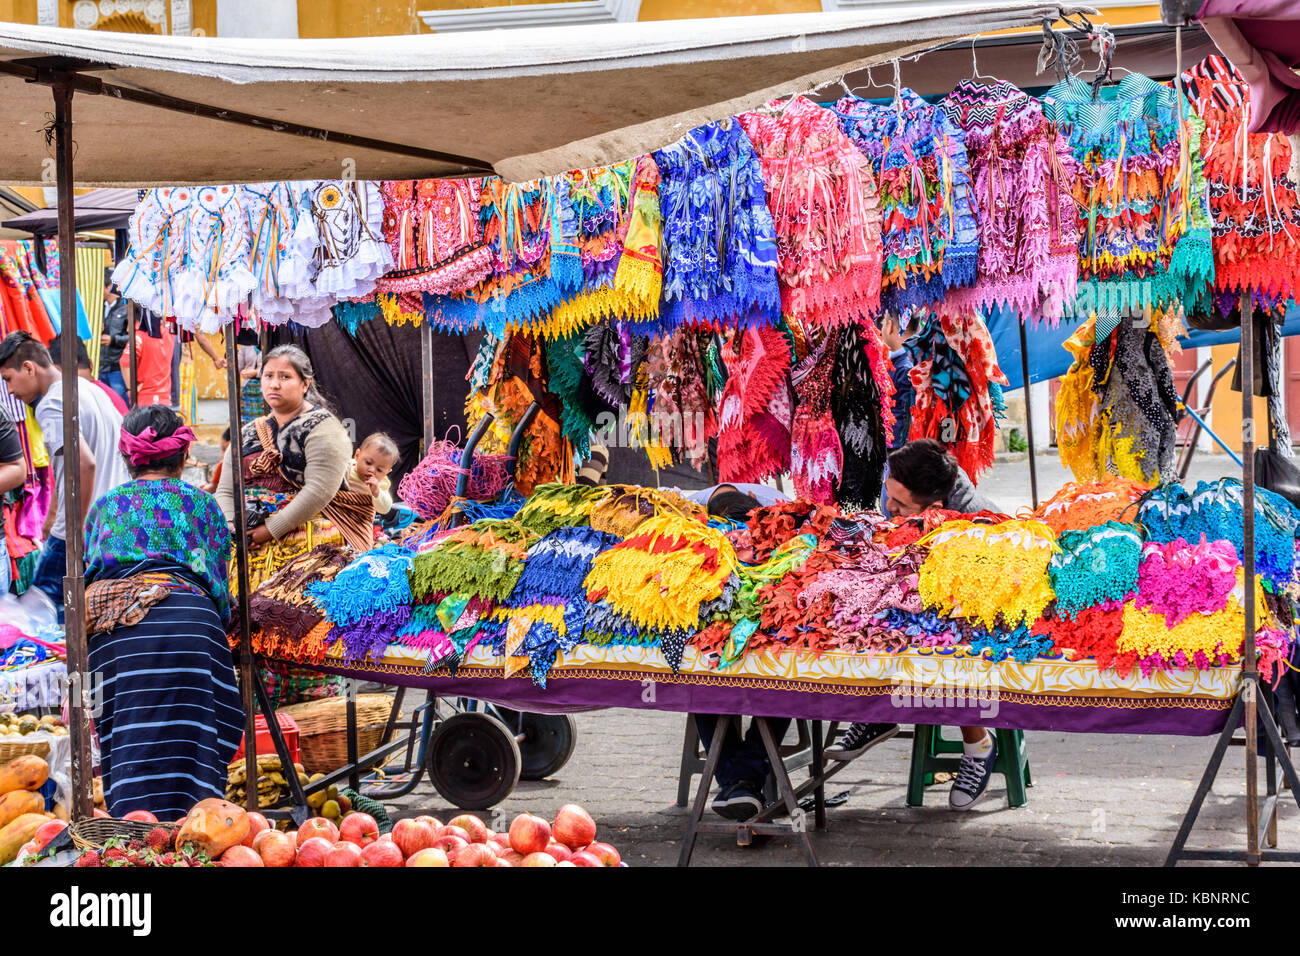 Santa Maria de Jesus, Guatemala - August 20, 2017: Sunday market stall selling colorful aprons in small indigenous town on slopes of Agua volcano Stock Photo